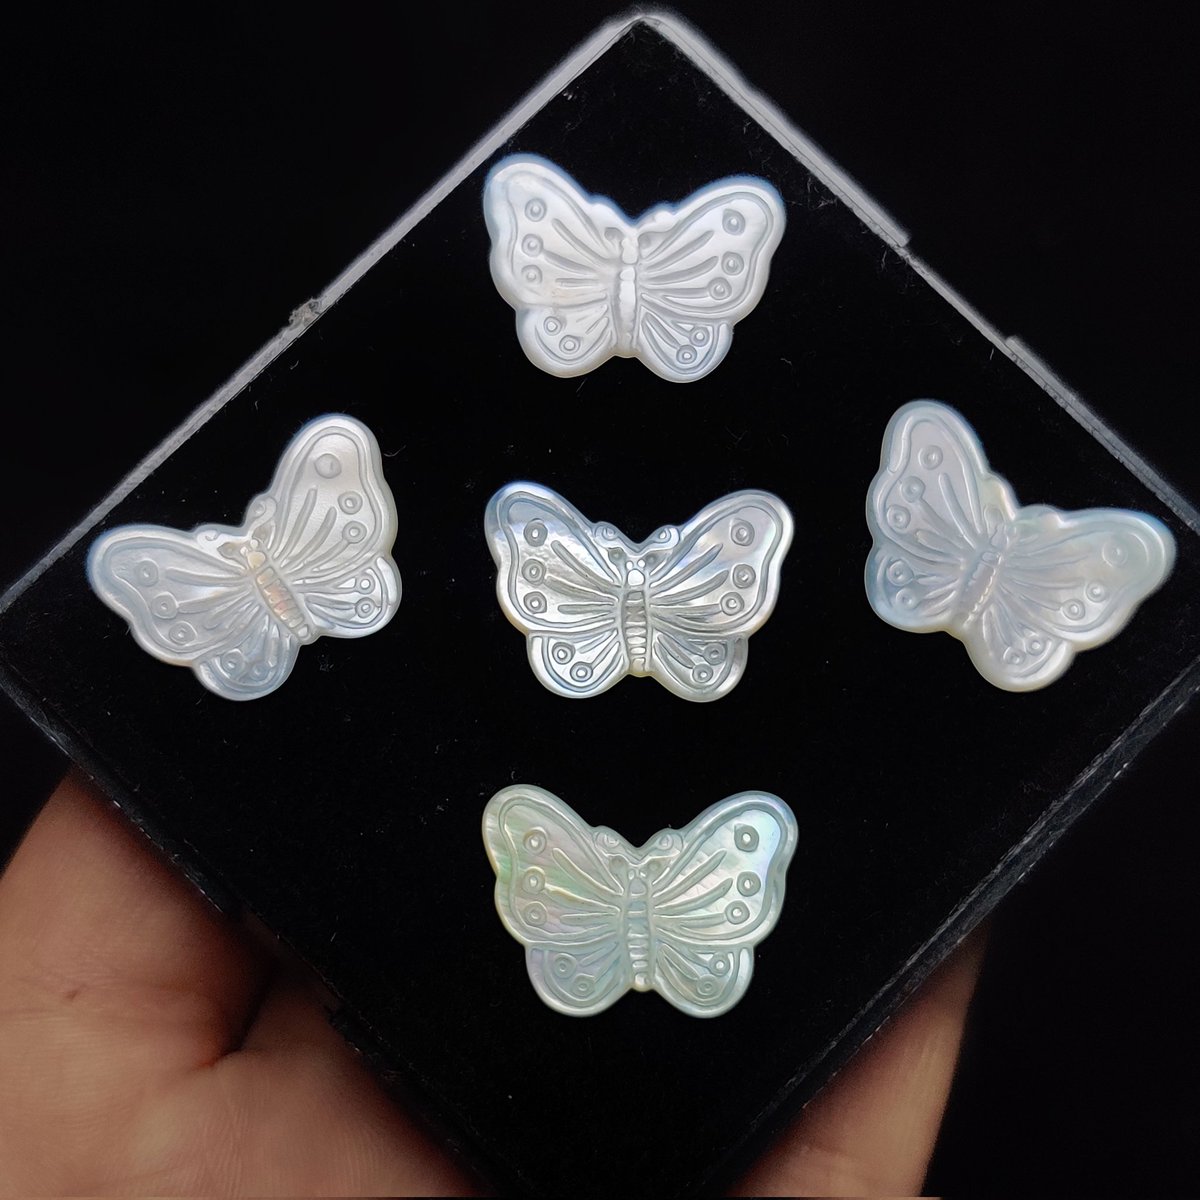 This beautiful butterfly is a work of art, created by skilled artisans using the natural beauty of mother of pearl🦋🦋🦋🦋🦋
#GemstoneLove#CrystalHealing#NatureInspired#EarthEnergy#HealingStones#JewelryAddict
#GemstoneJunkie#CrystalVibes
#MysticalMossAgate#NaturalBeauty